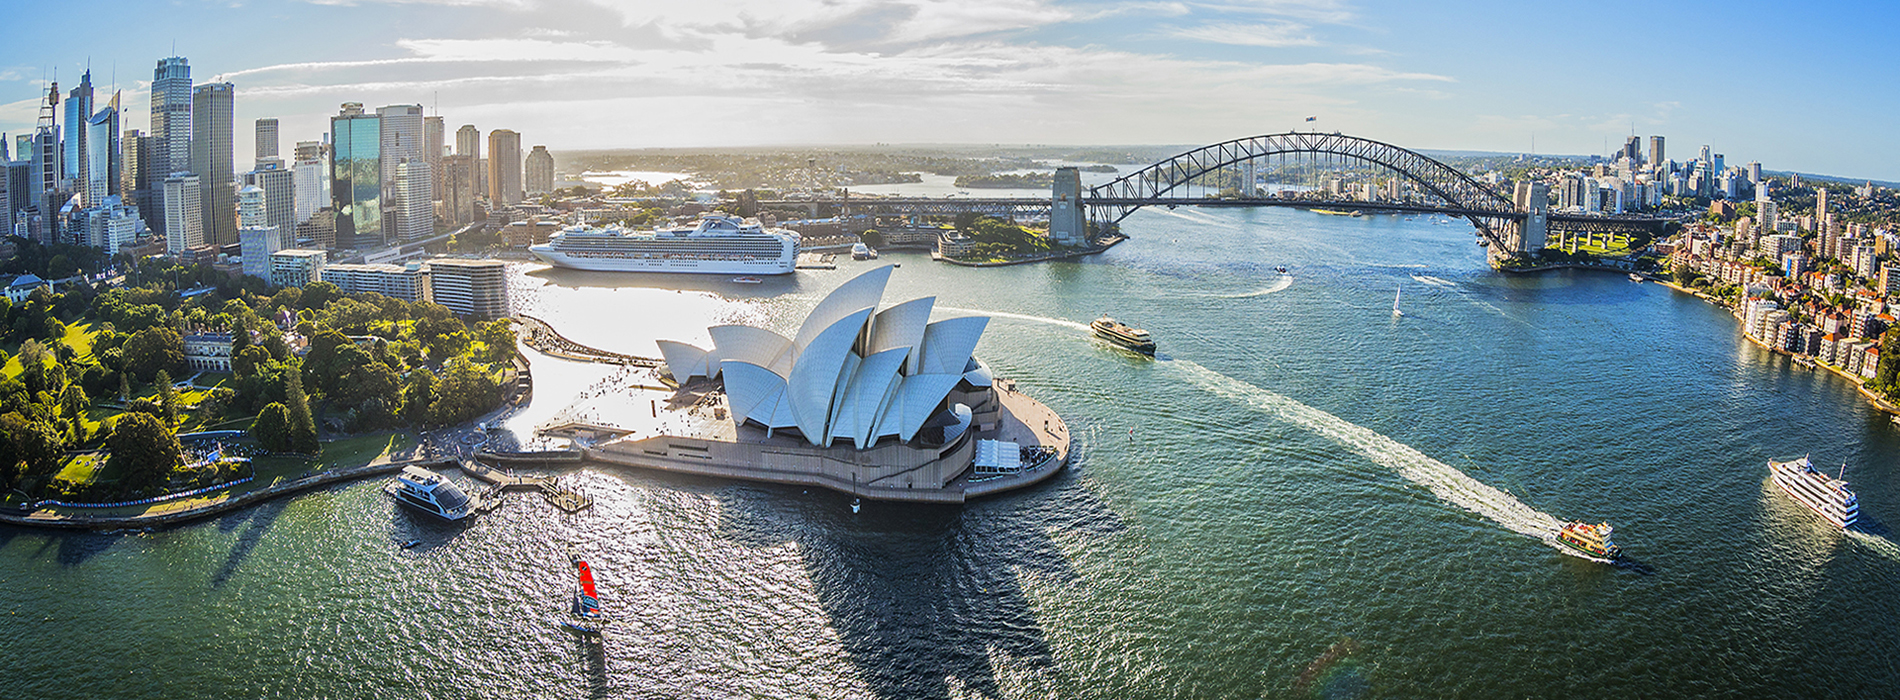 10 MILLION VISITORS EXPECTED TO HEAD TO SYDNEY THIS SUMMER